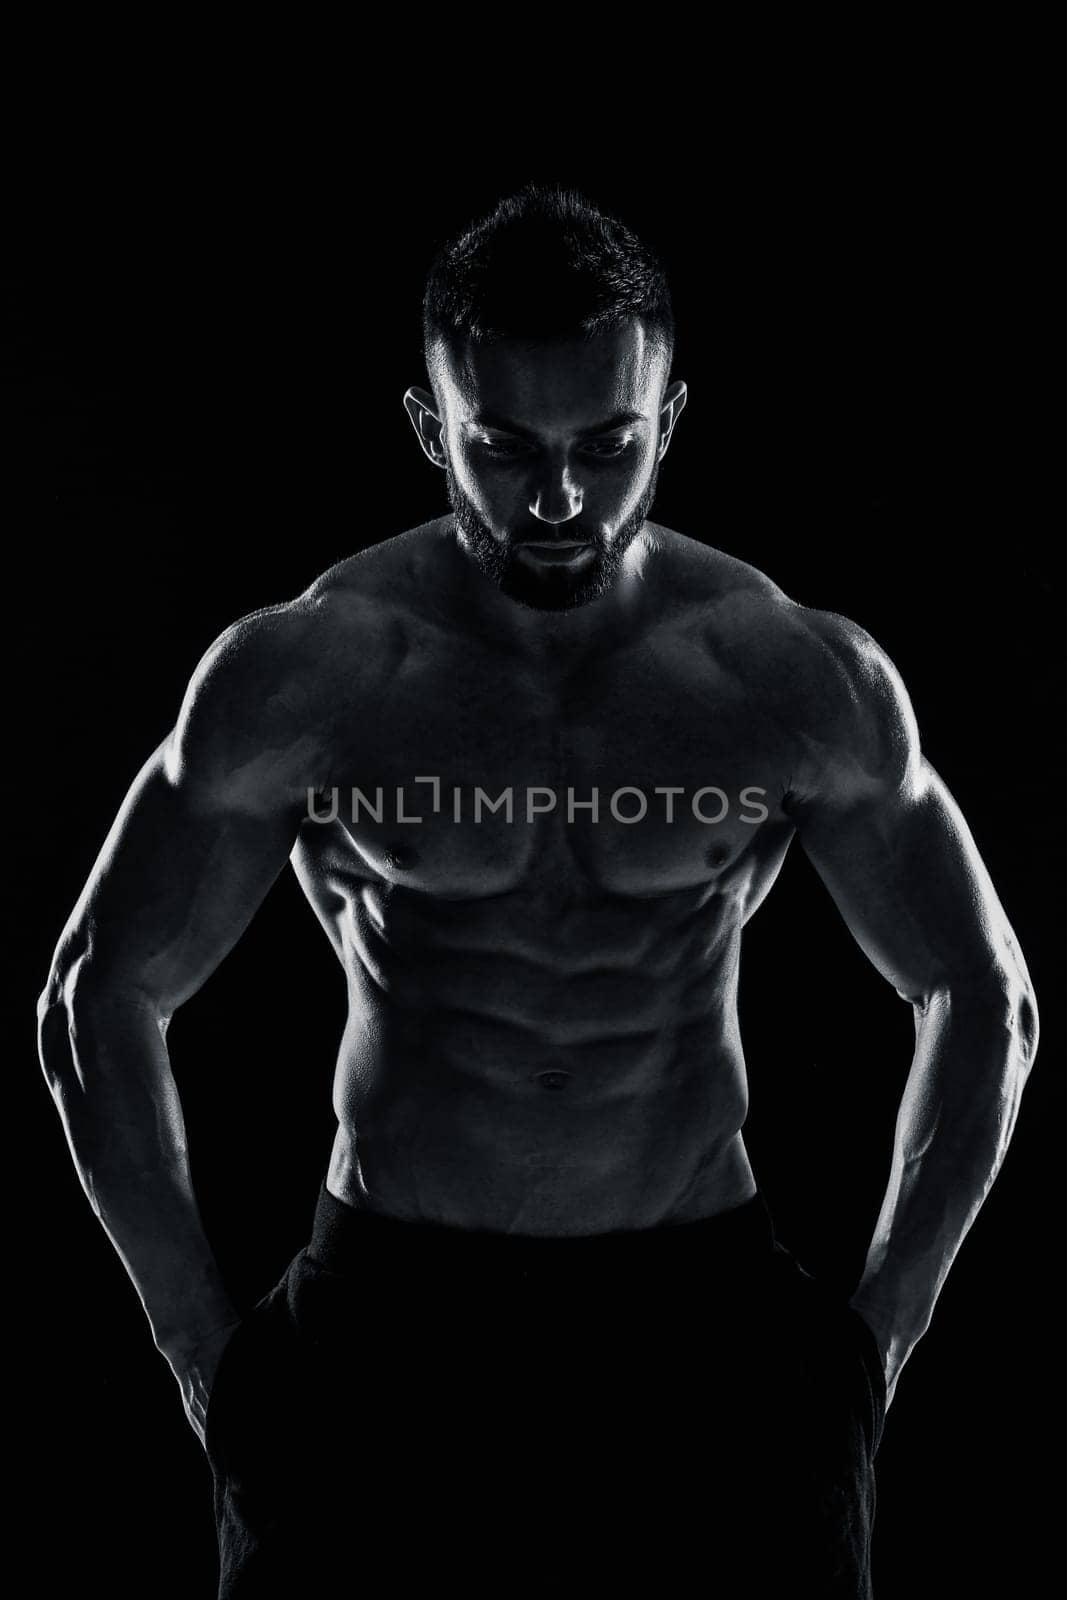 Image of very muscular man posing with naked torso in studio on black background. Black and white color